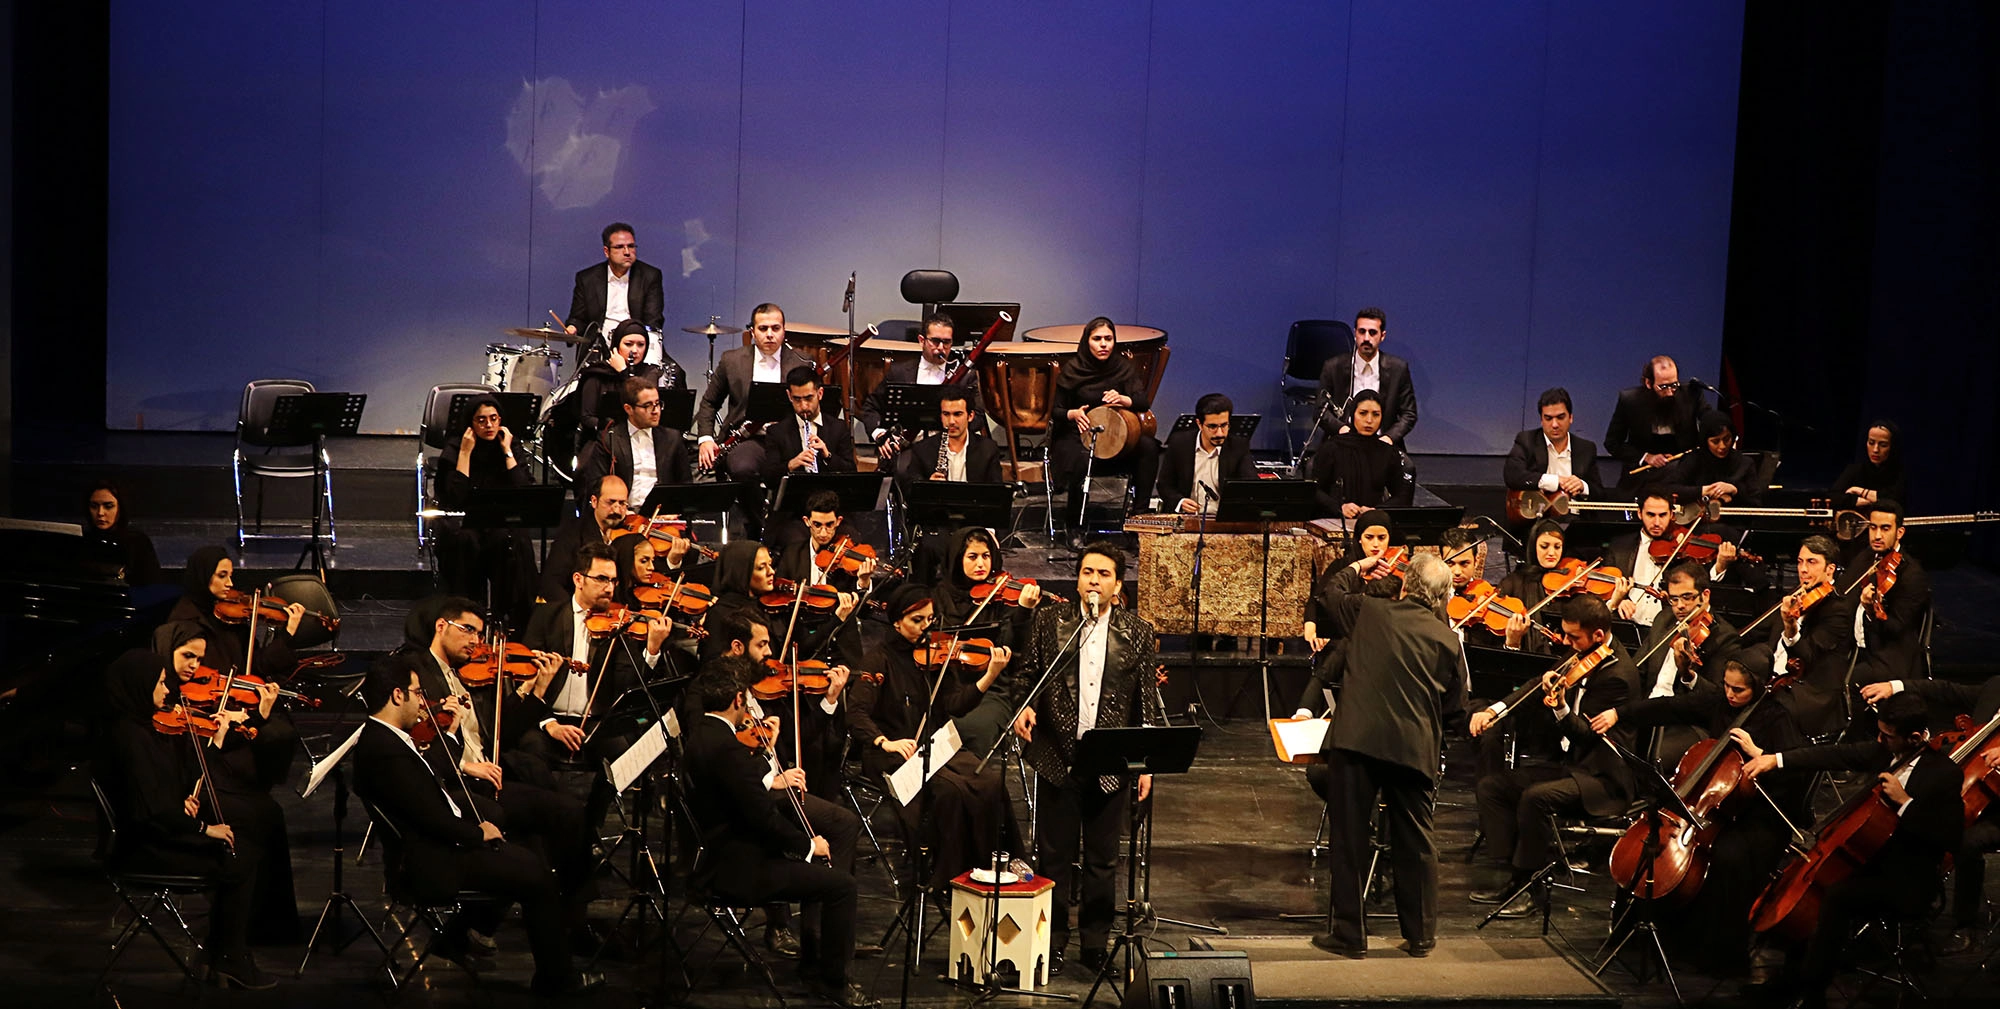 Iran’s National Orchestra Concert, 15th January 2018